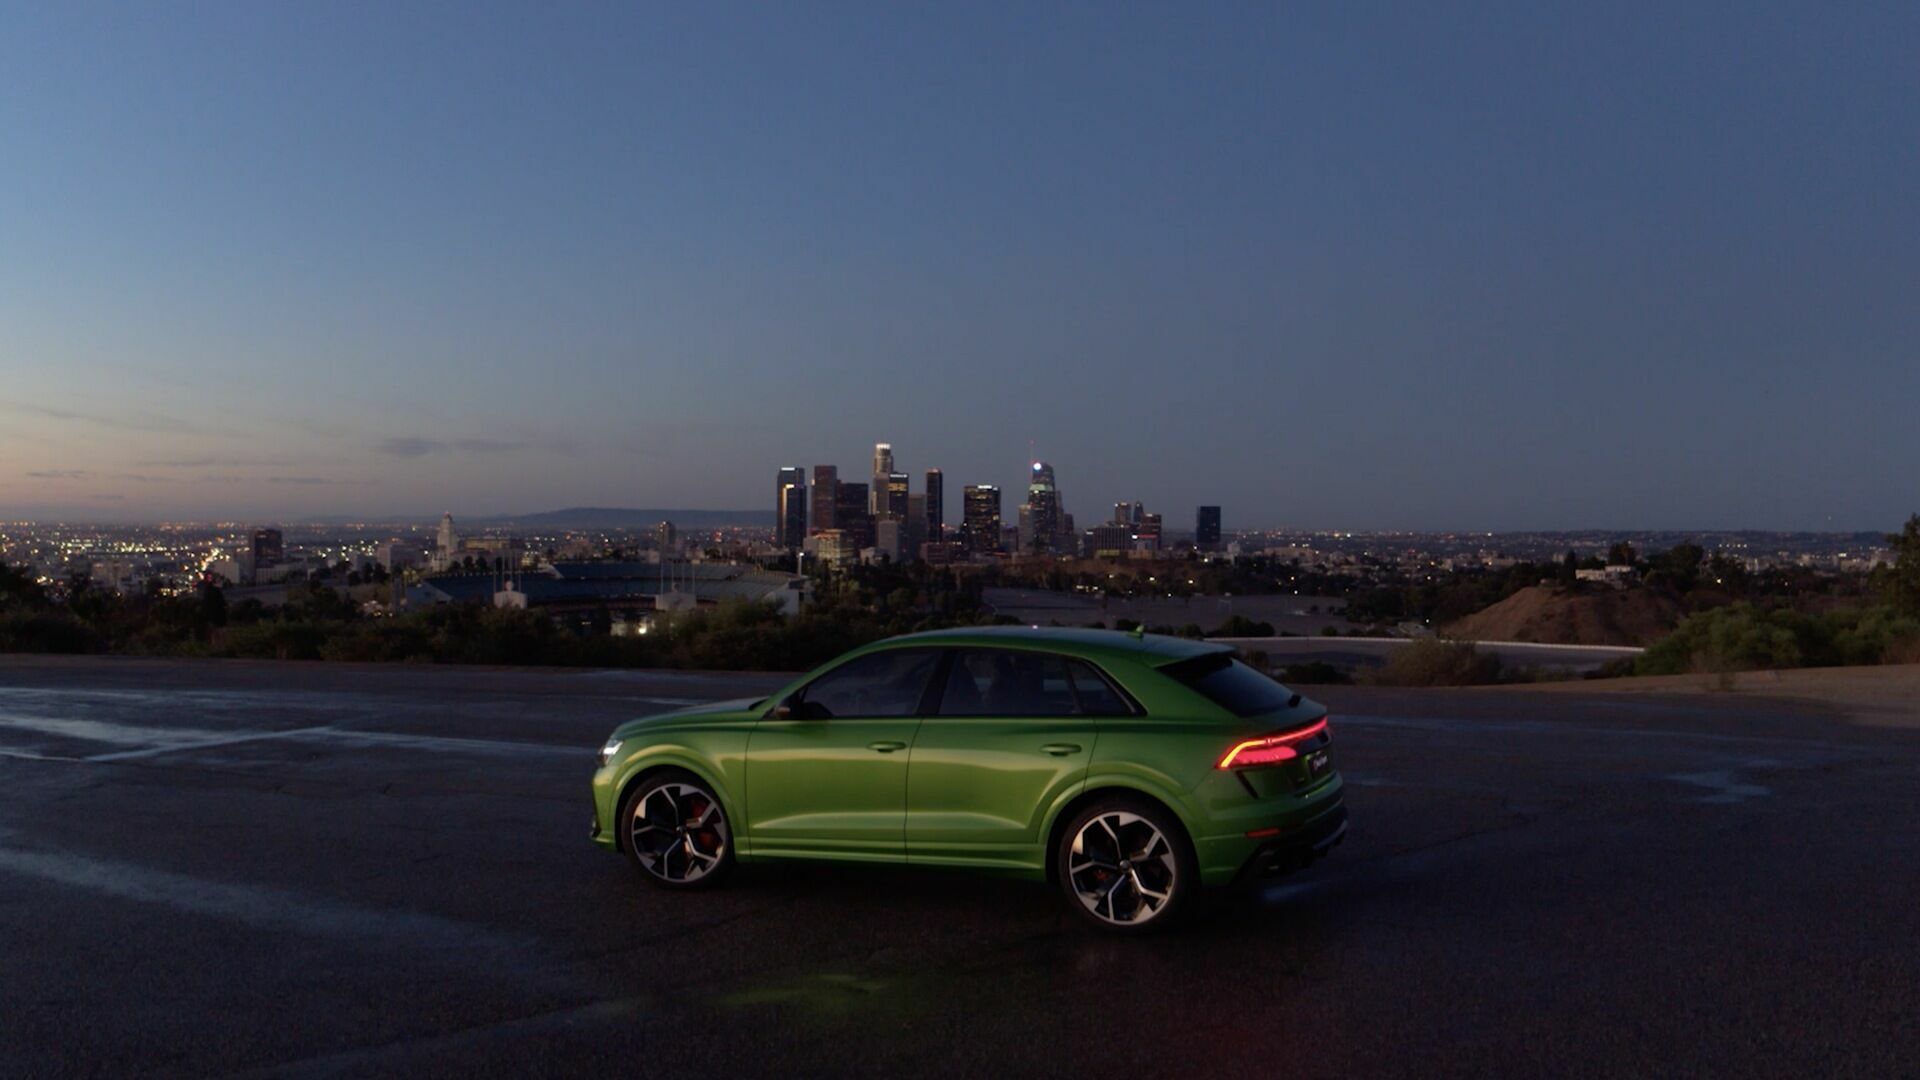 Audi product fireworks in Los Angeles 2019 – the highlights